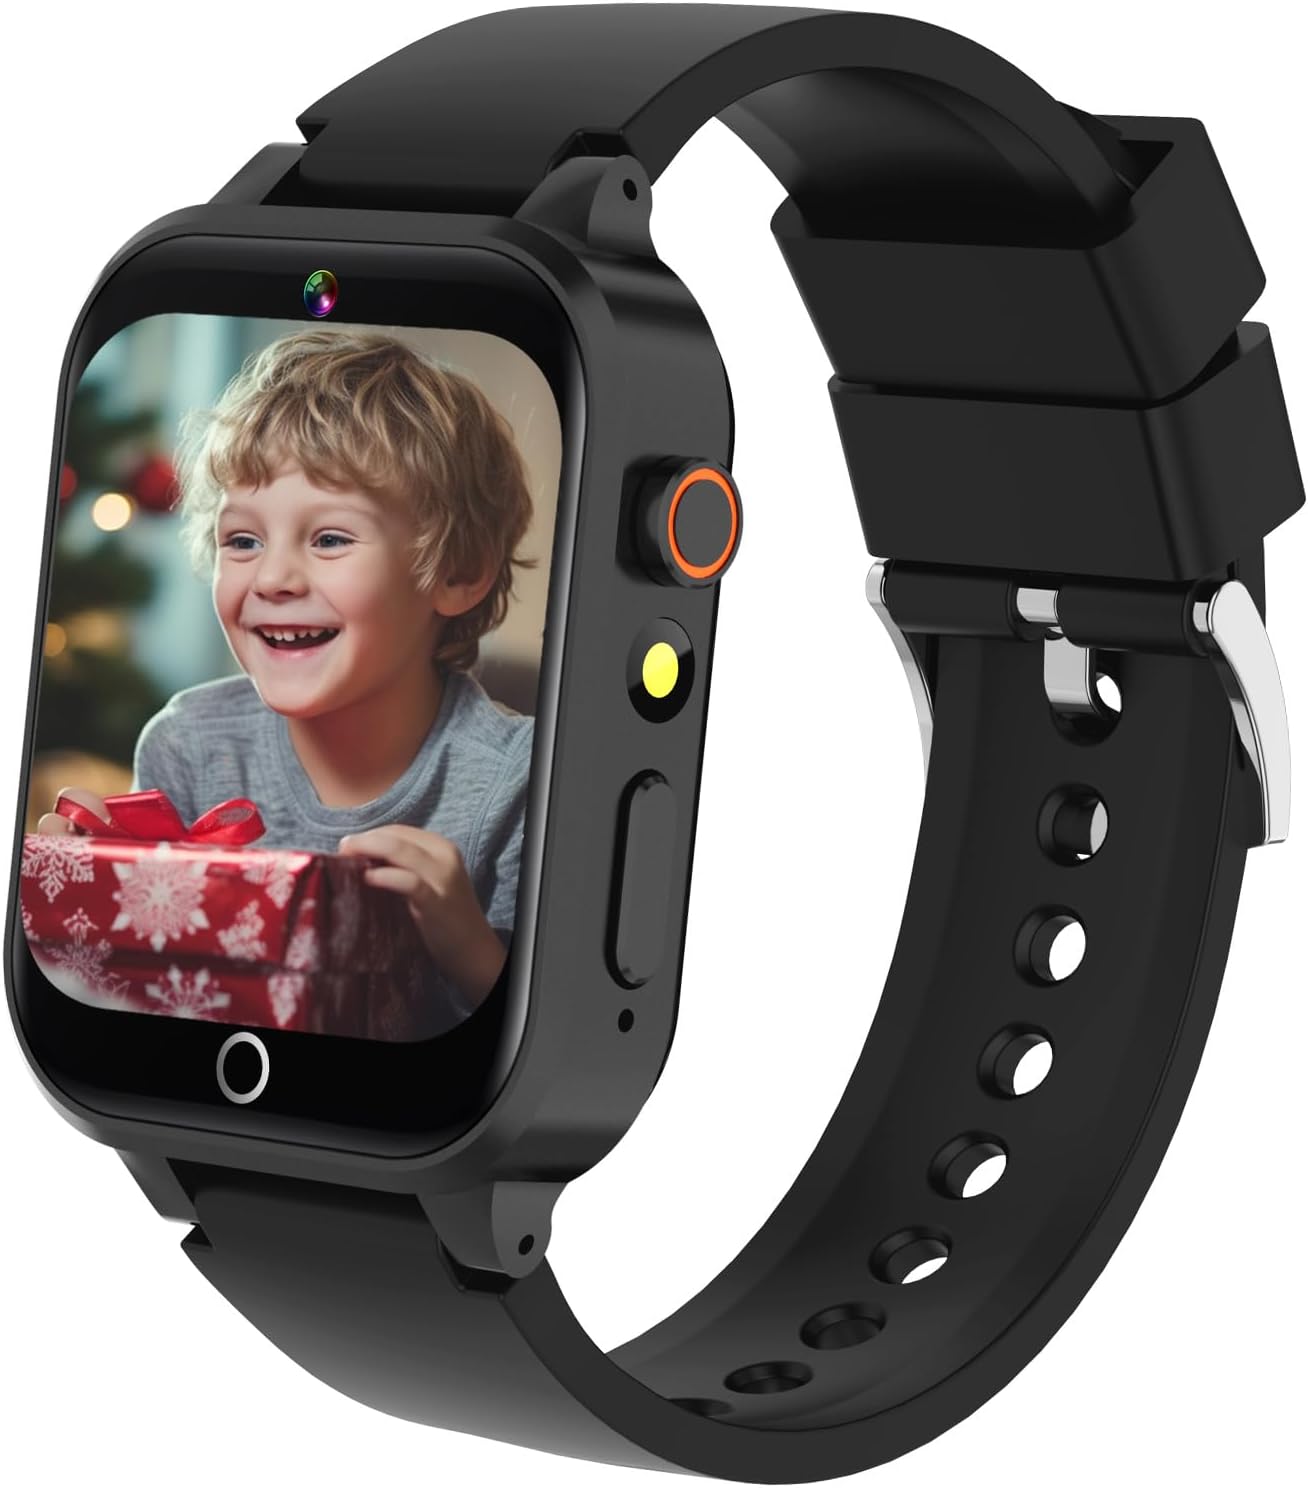 HD TouchScreen Kids Watch with 26 Games Video Camera Music Pedometer Audiostory Learn Card Educational Toys